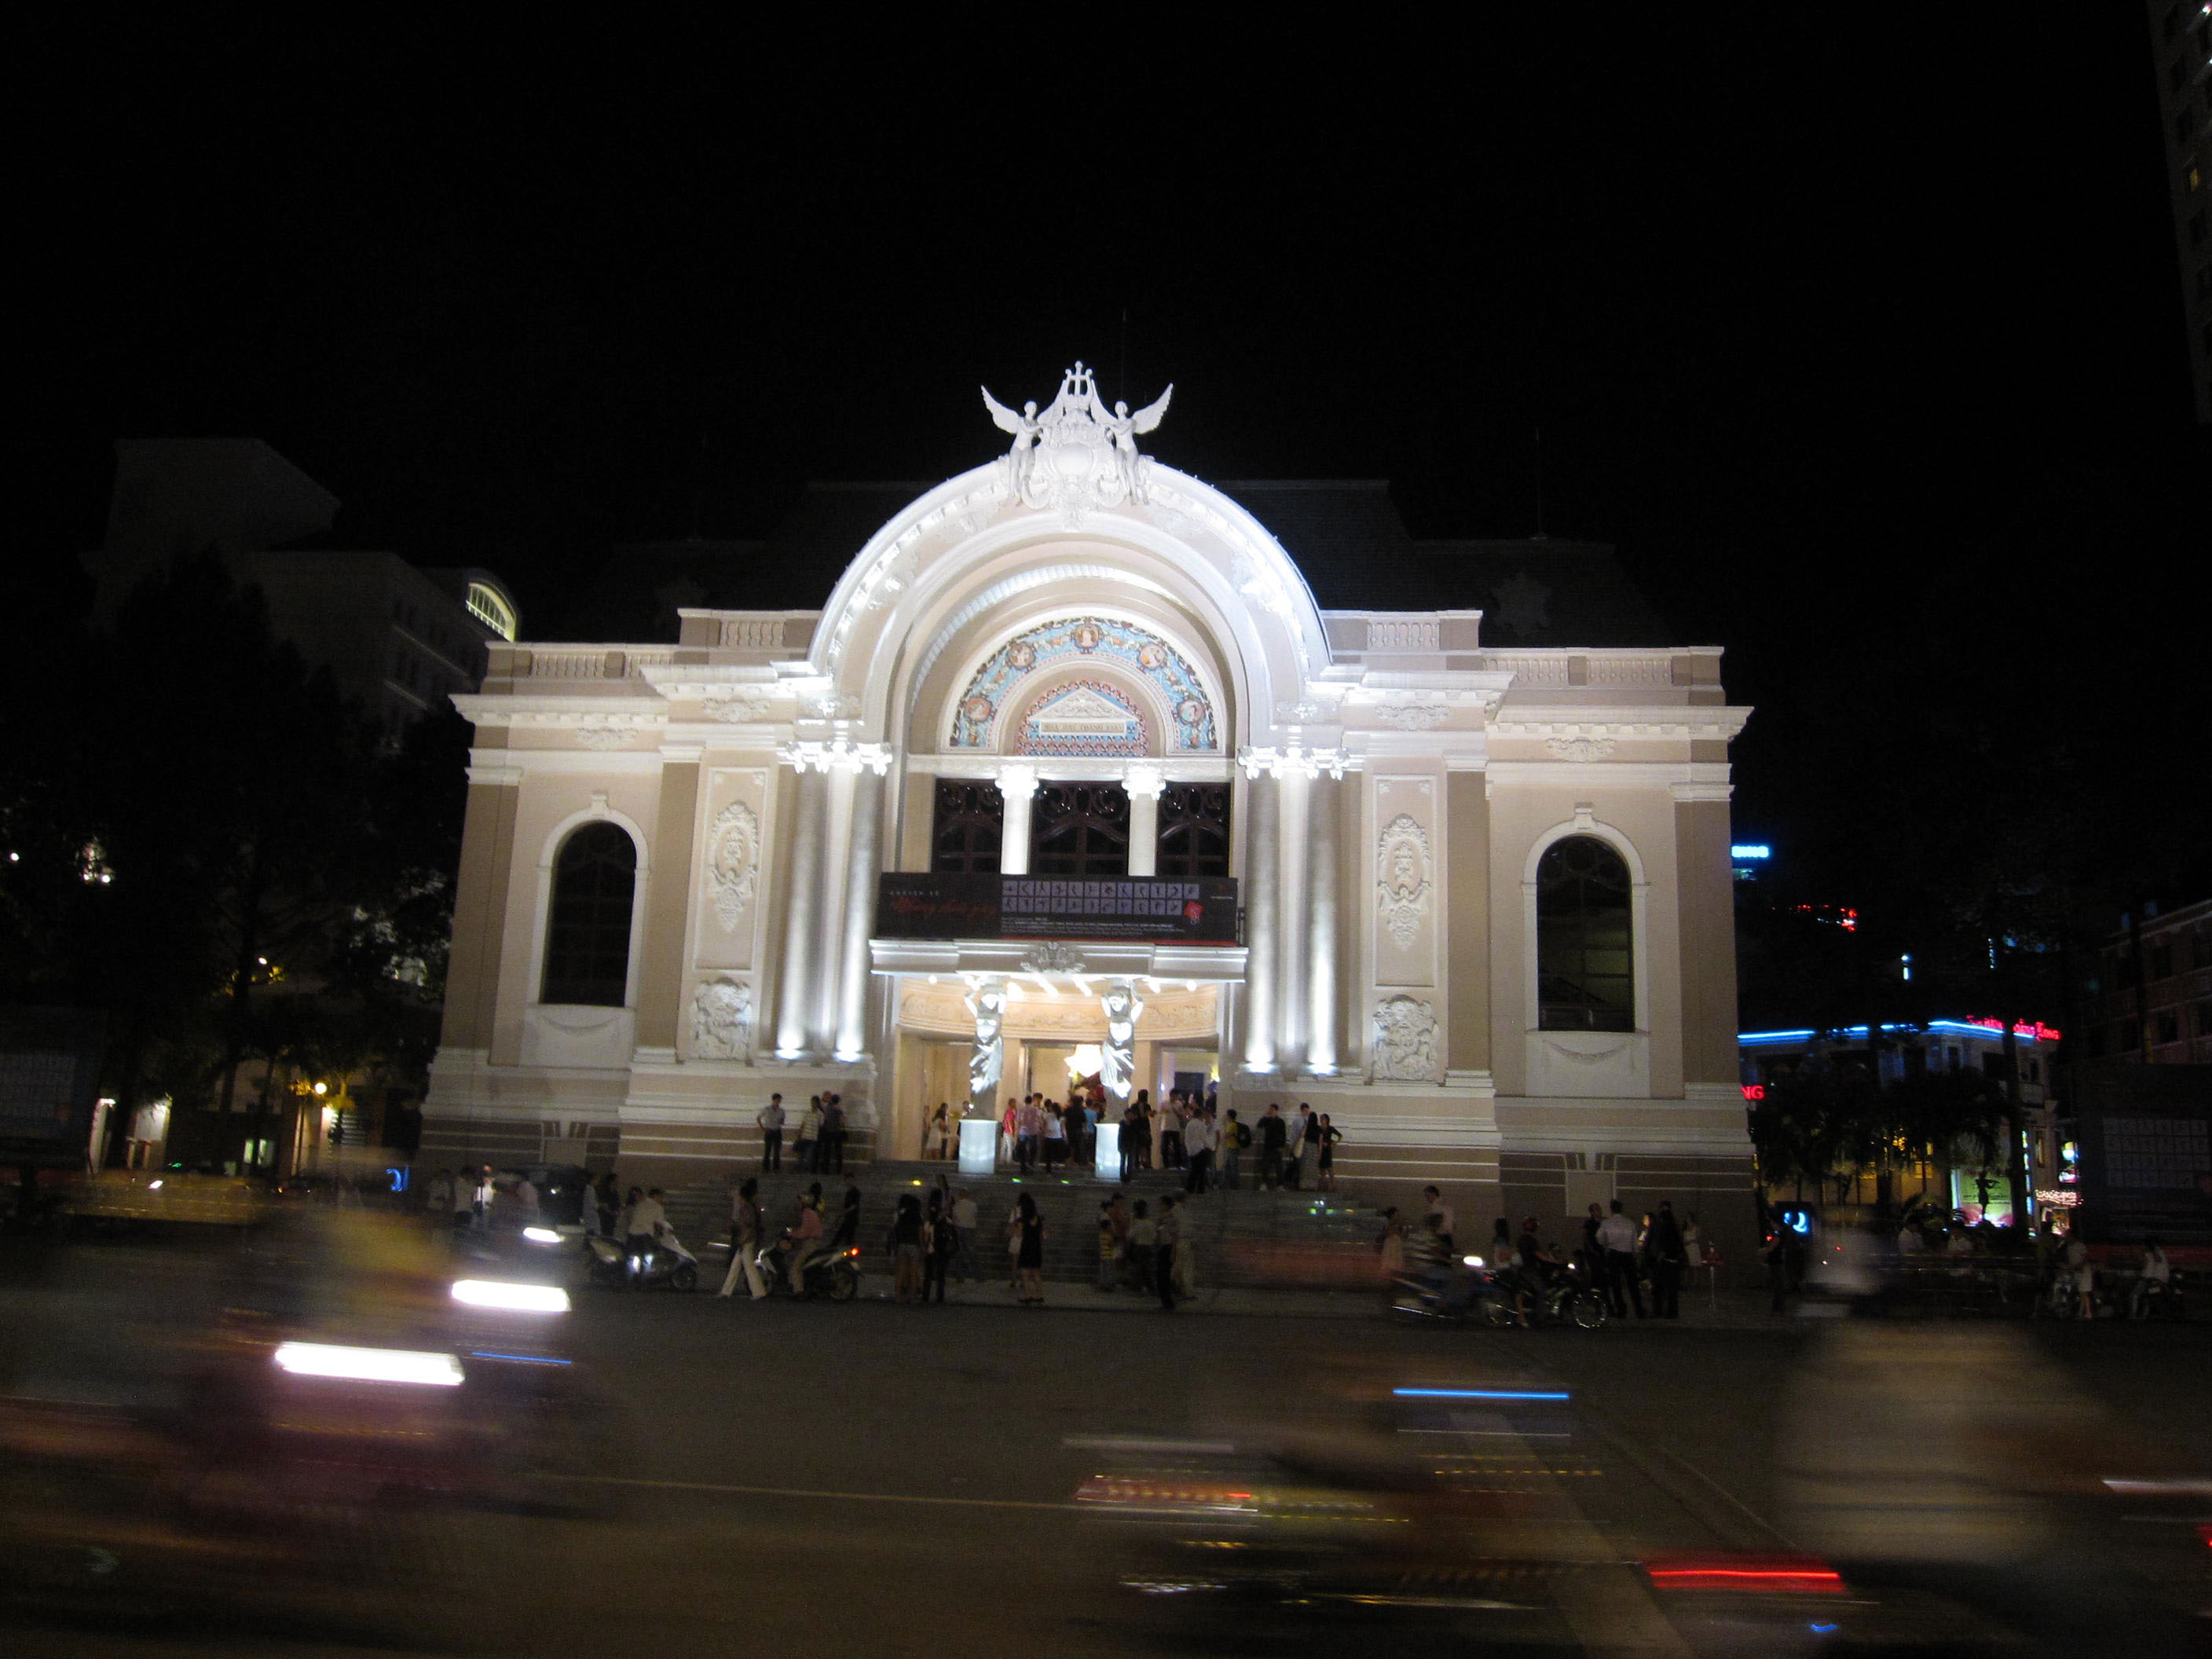 HCMC Opera House French colonial architecture Nov 2009 06